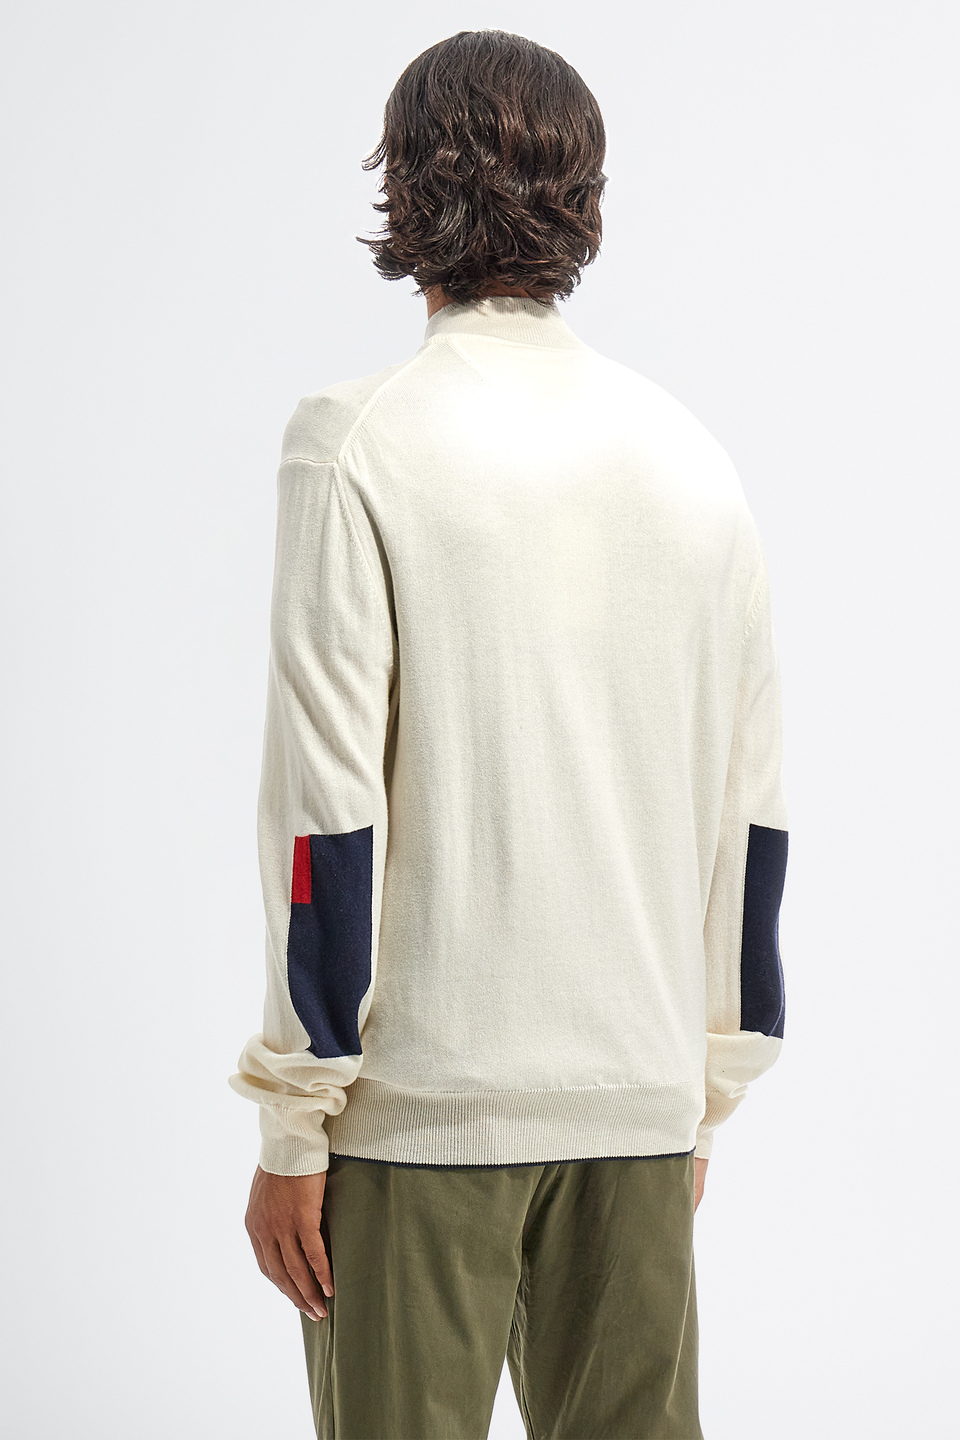 Wool sweater Essential high neck and regular fit zip | La Martina - Official Online Shop